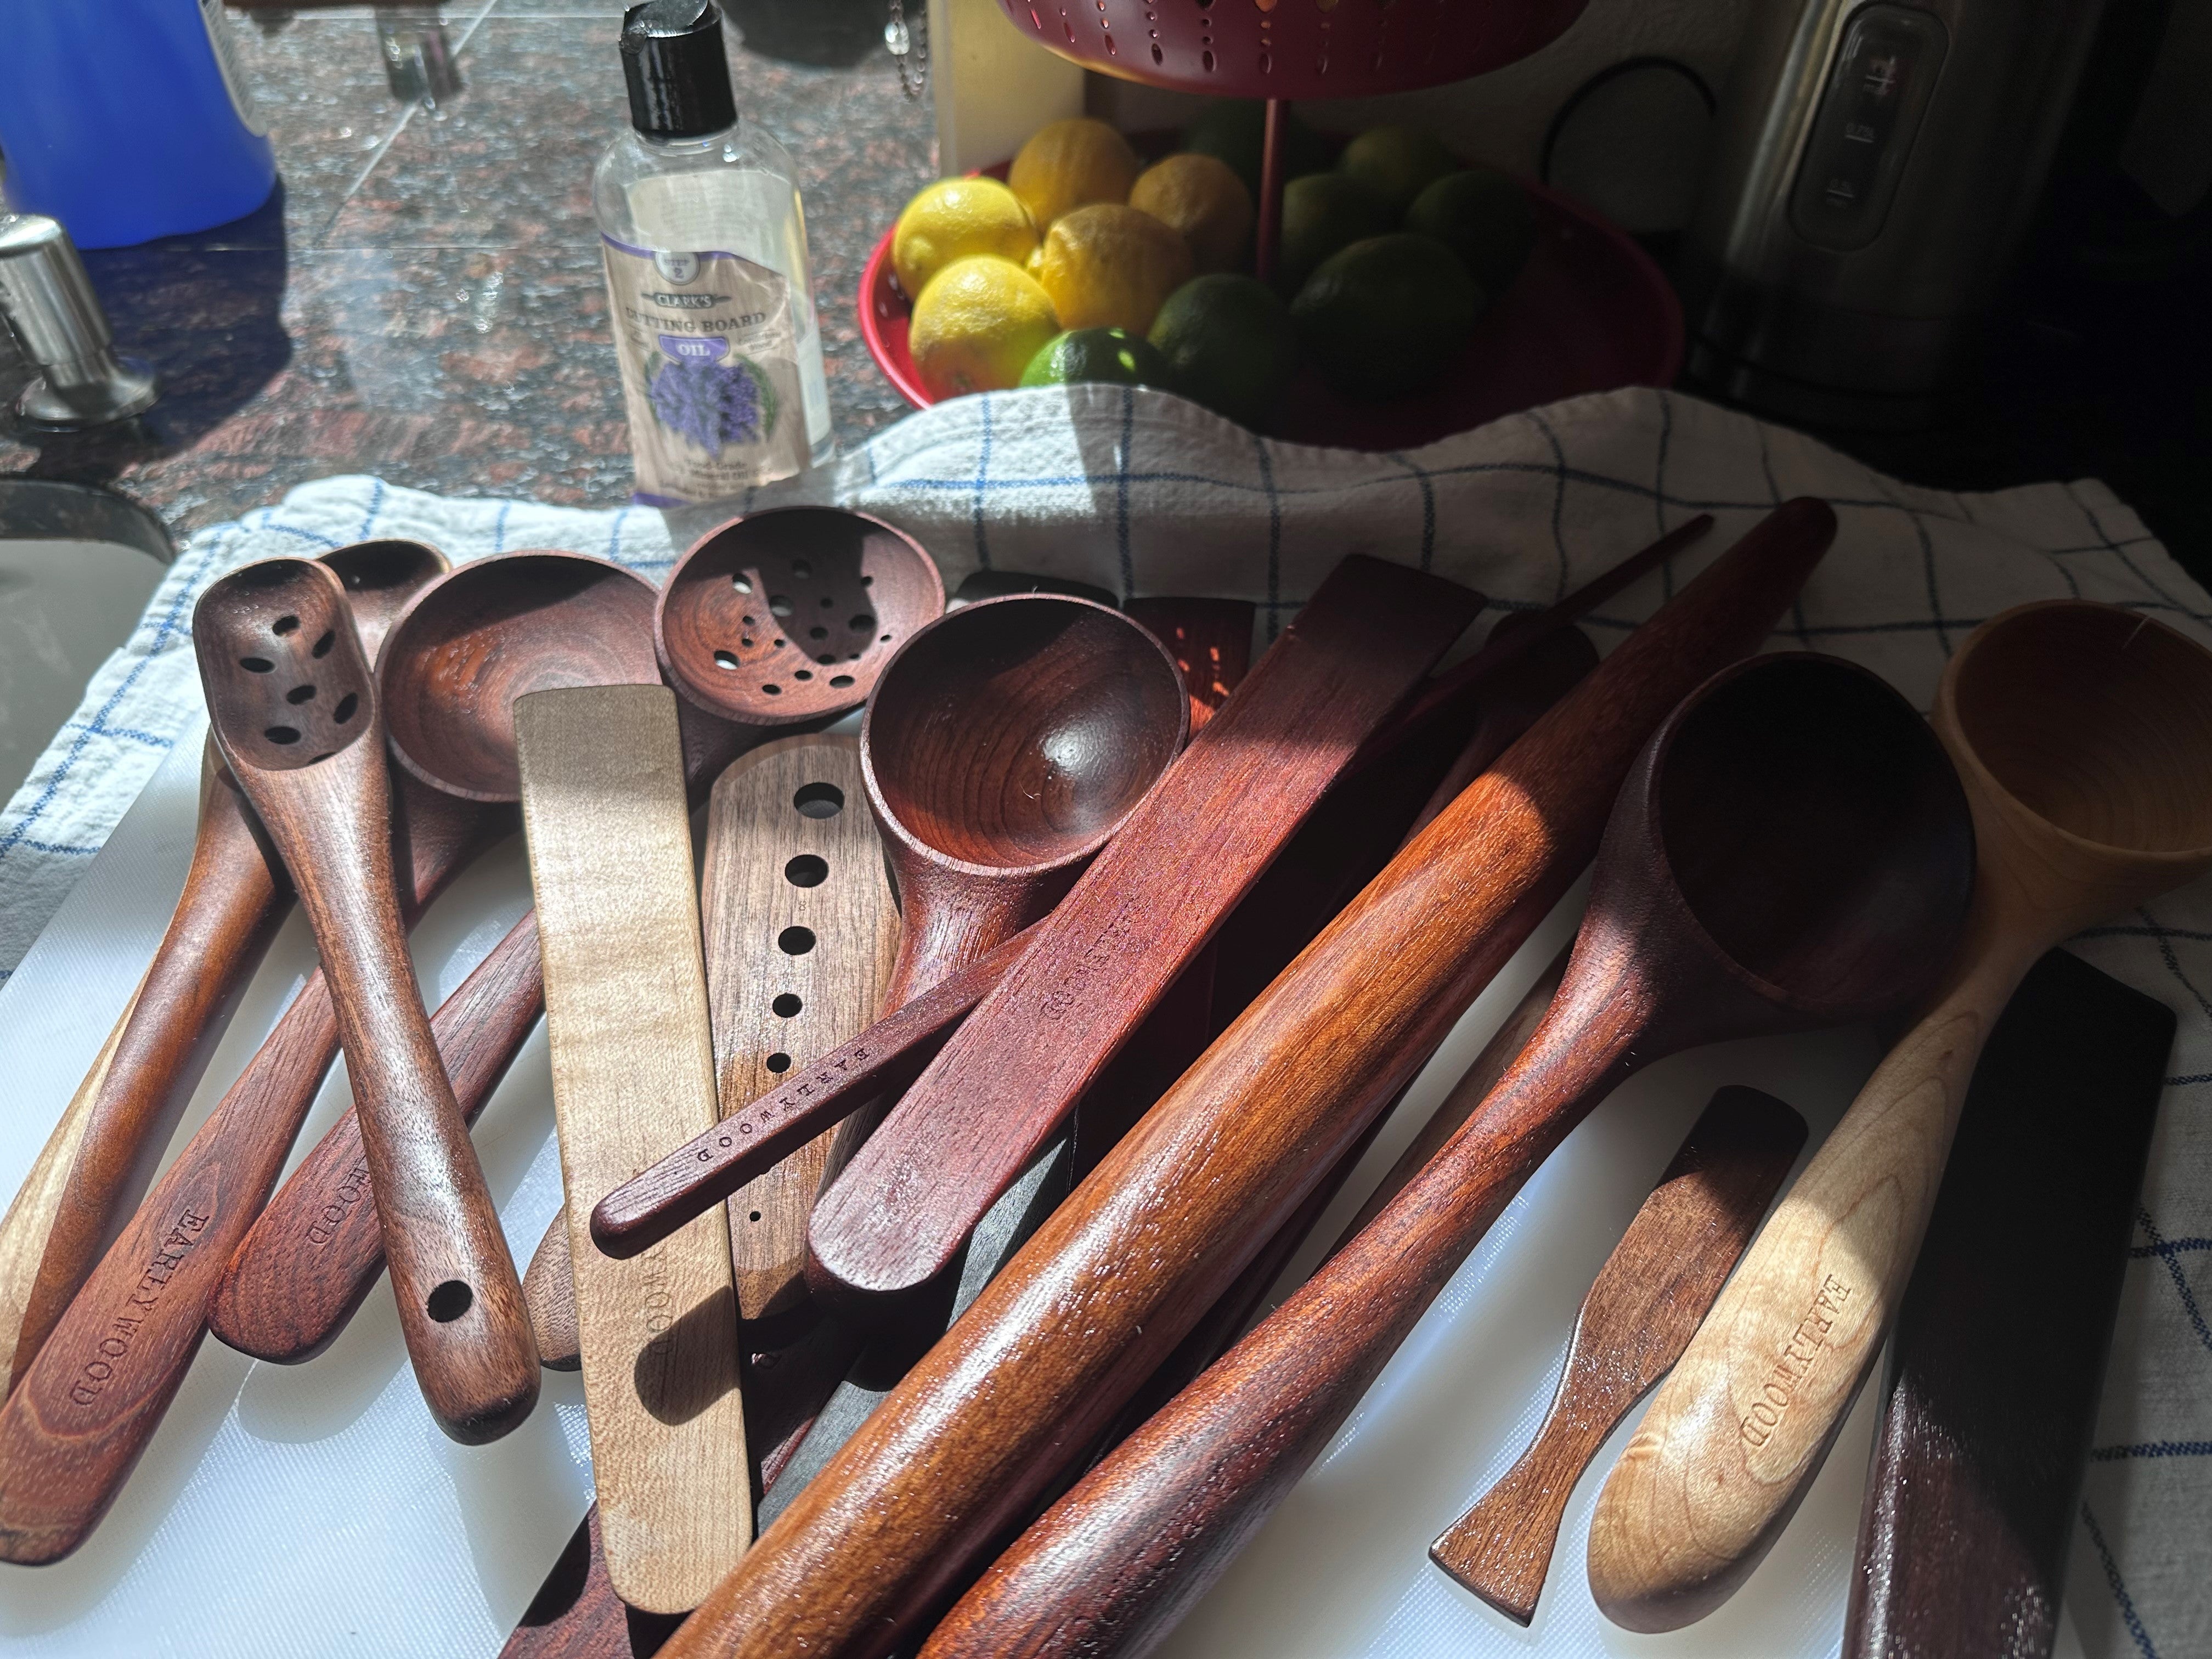 The investment and caring of wood tools in your kitchen